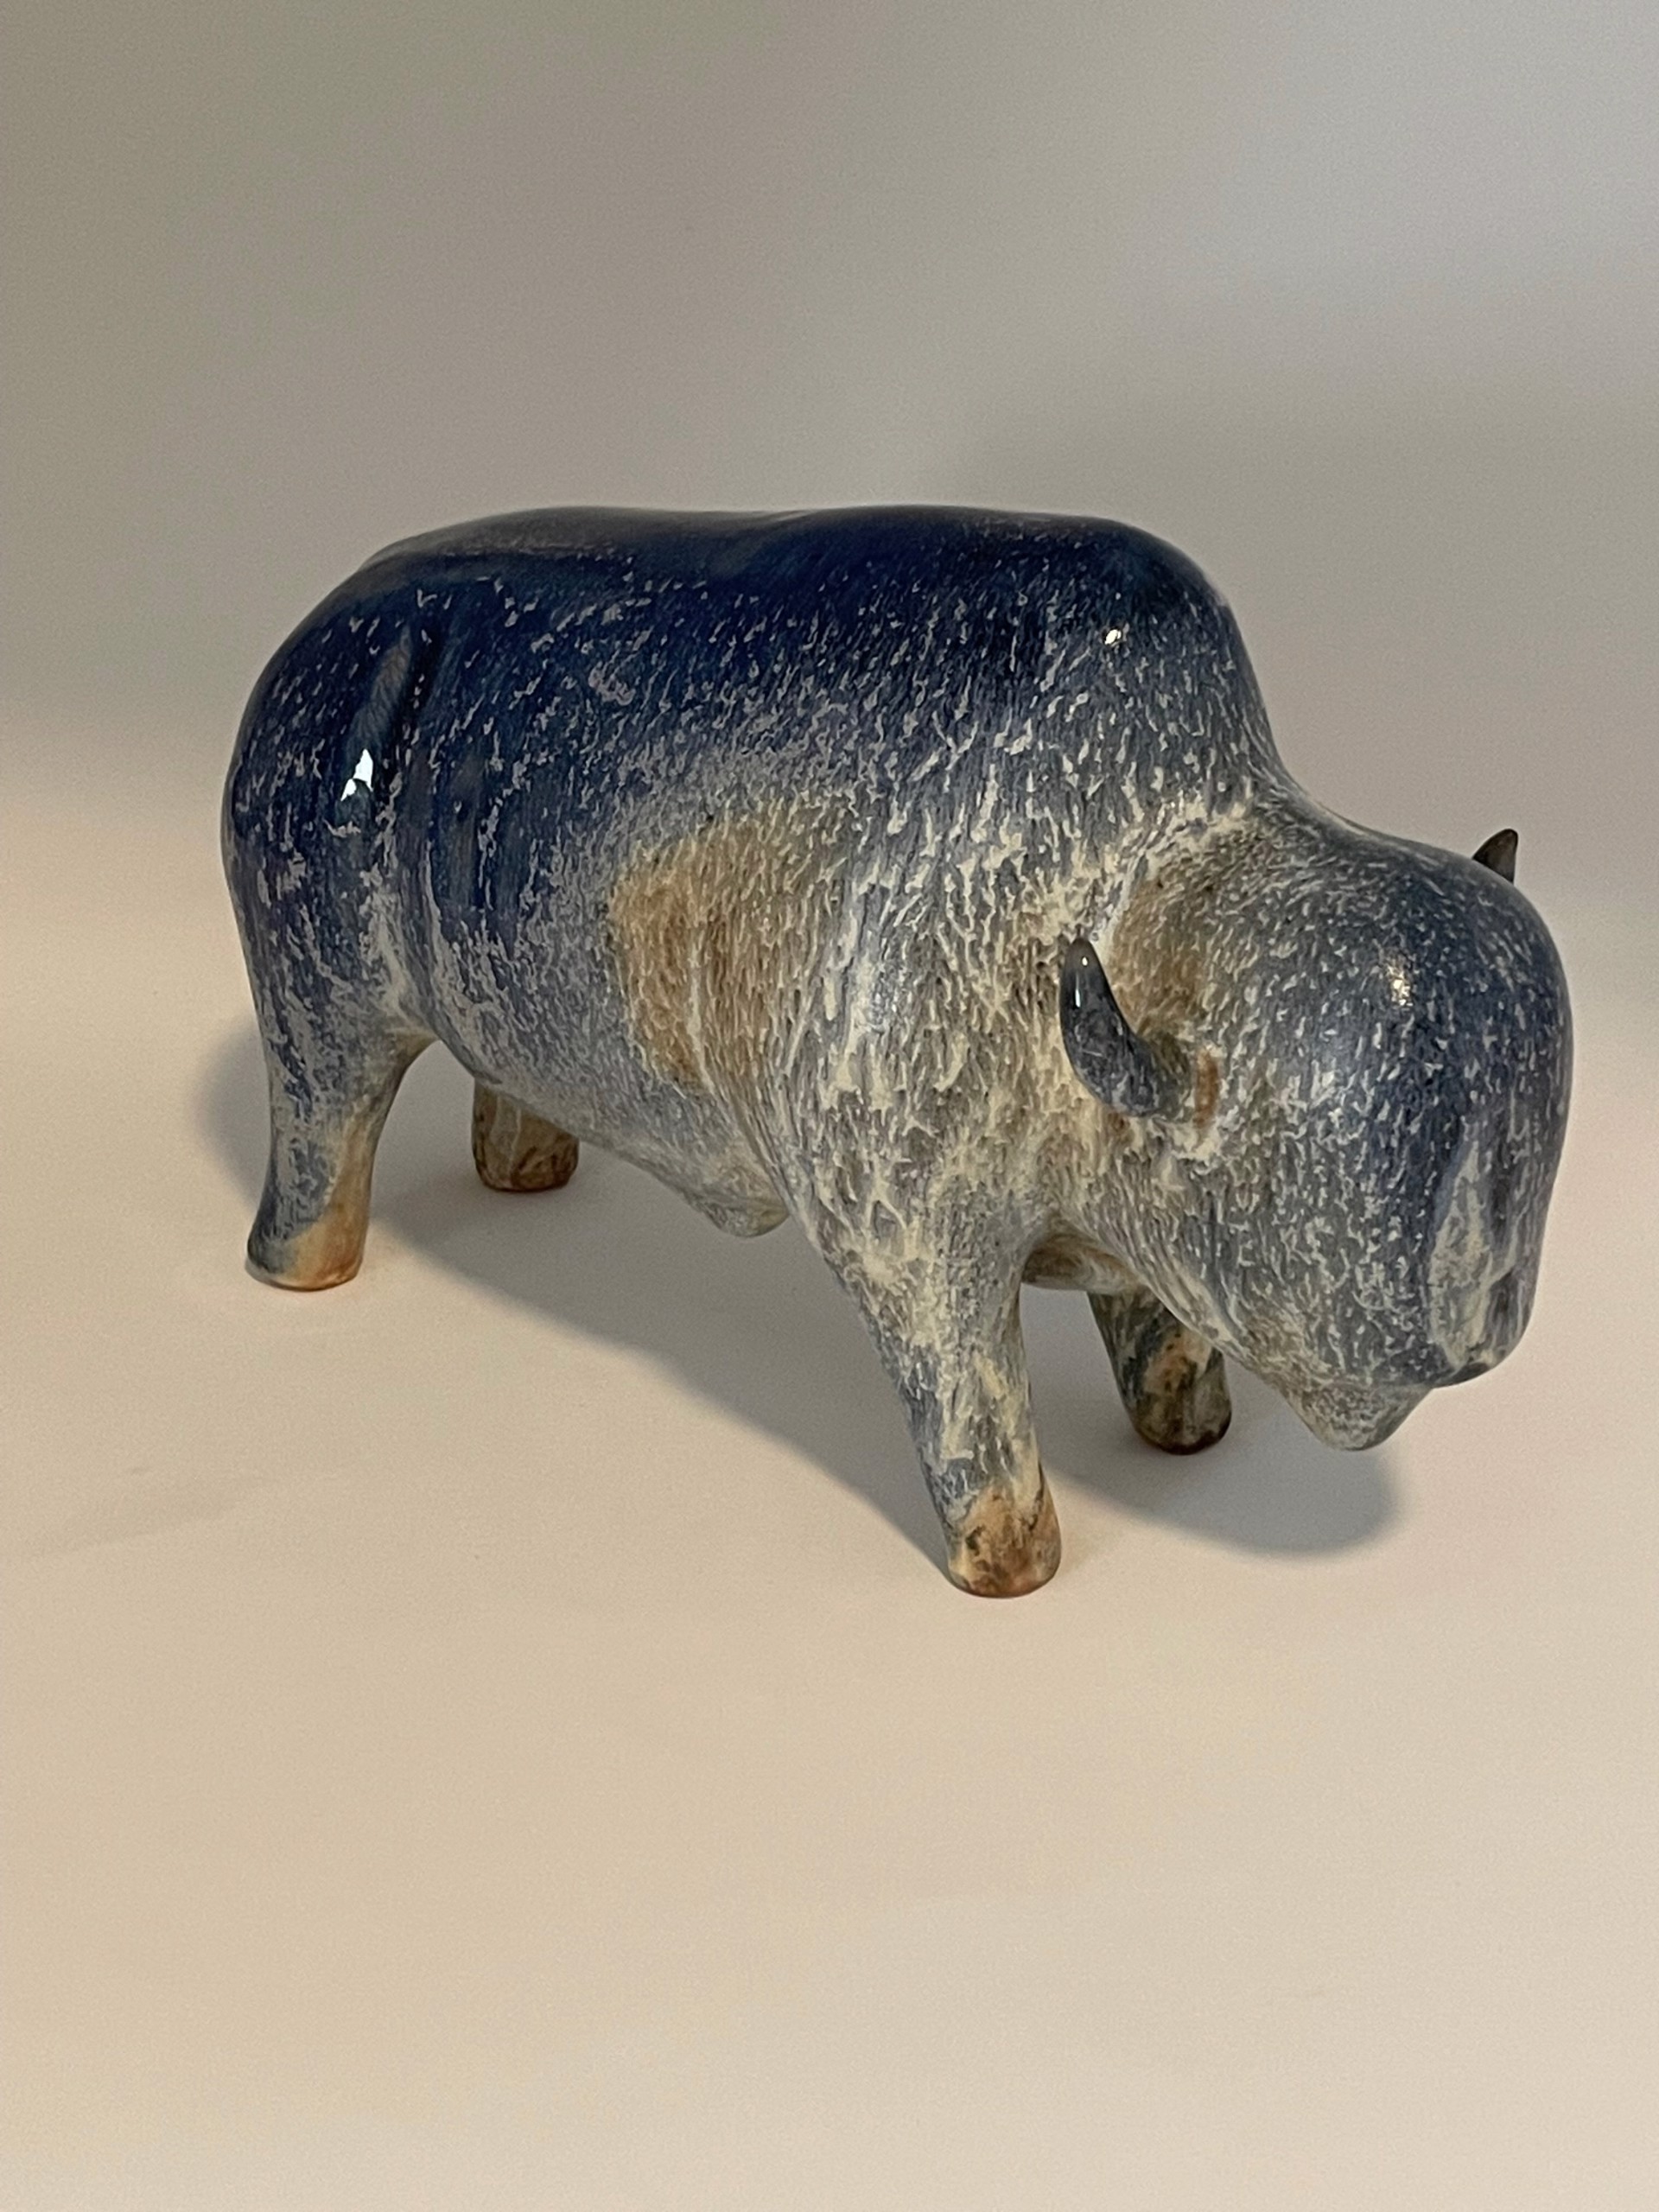 Blue & White Shiny Bison Facing Forward by Brian Horsch